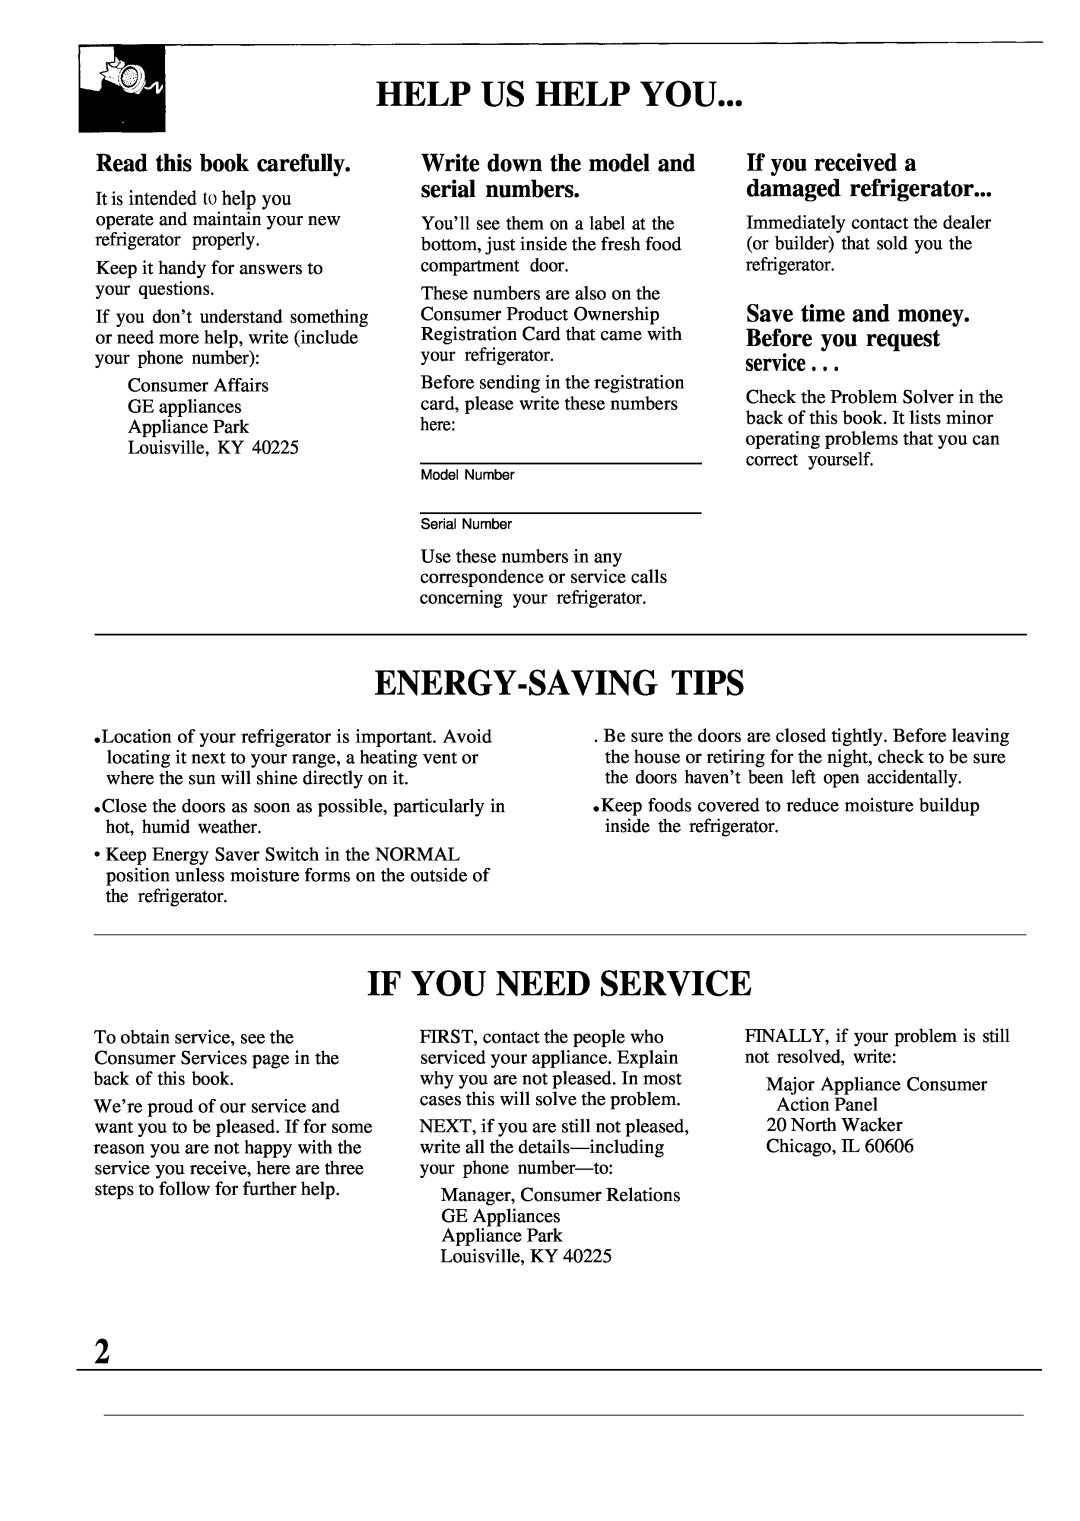 GE TBX12 operating instructions Help Us Help You, Energy-Saving Tips, If You Need Service, Read this book carefully 